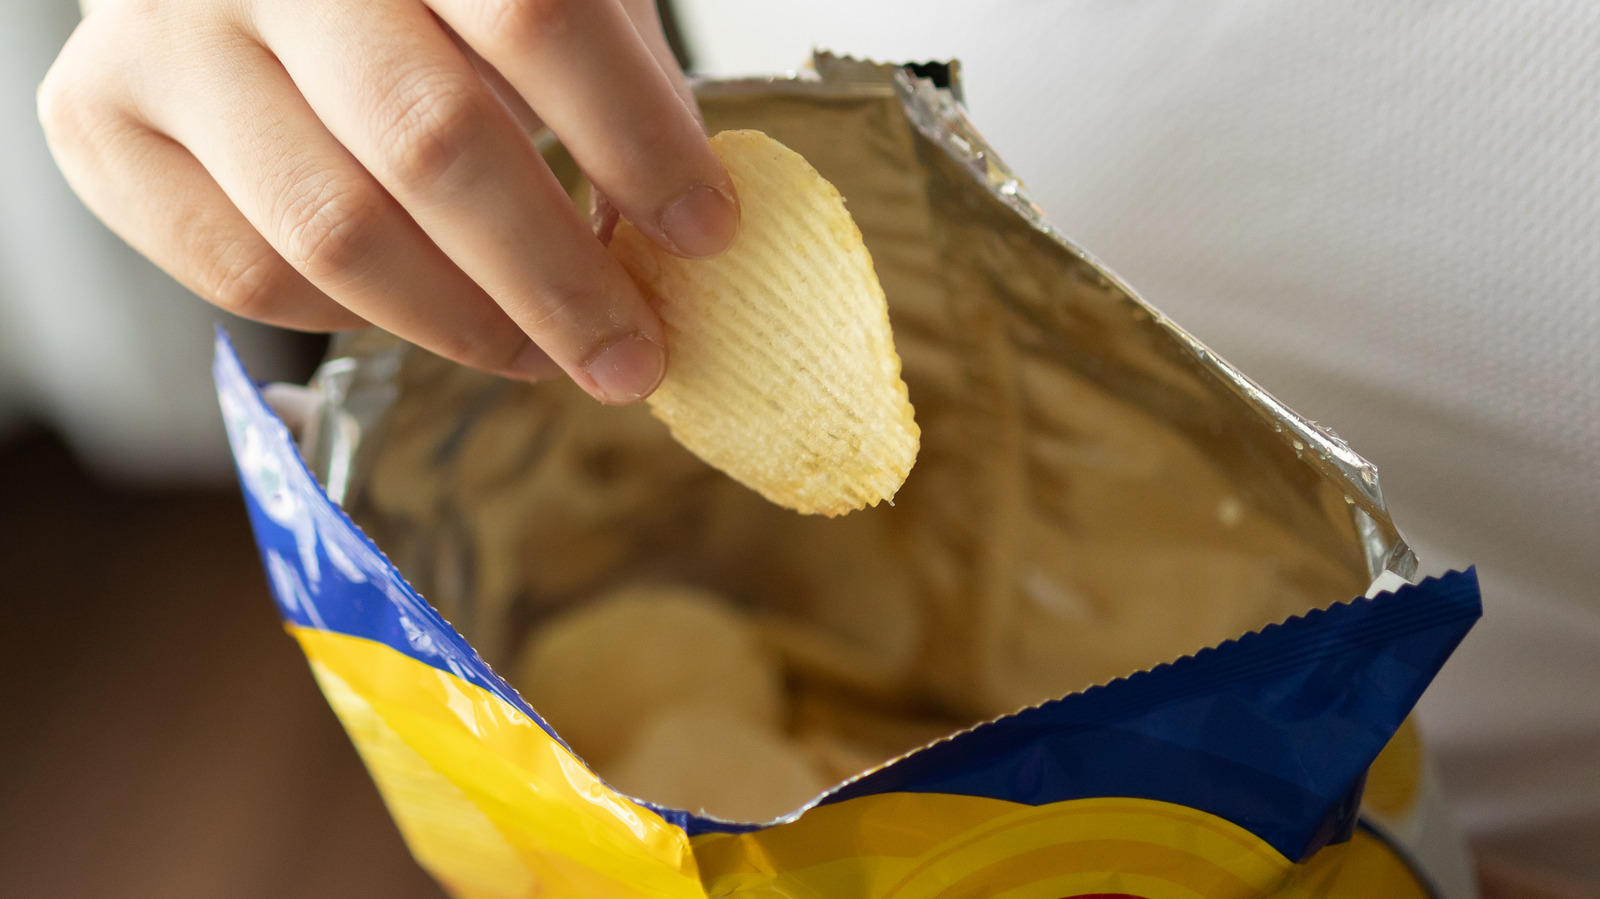 How To Fold Potato Chip Bag Without Clip The Best Way To Seal Chip Bags Without A Clip